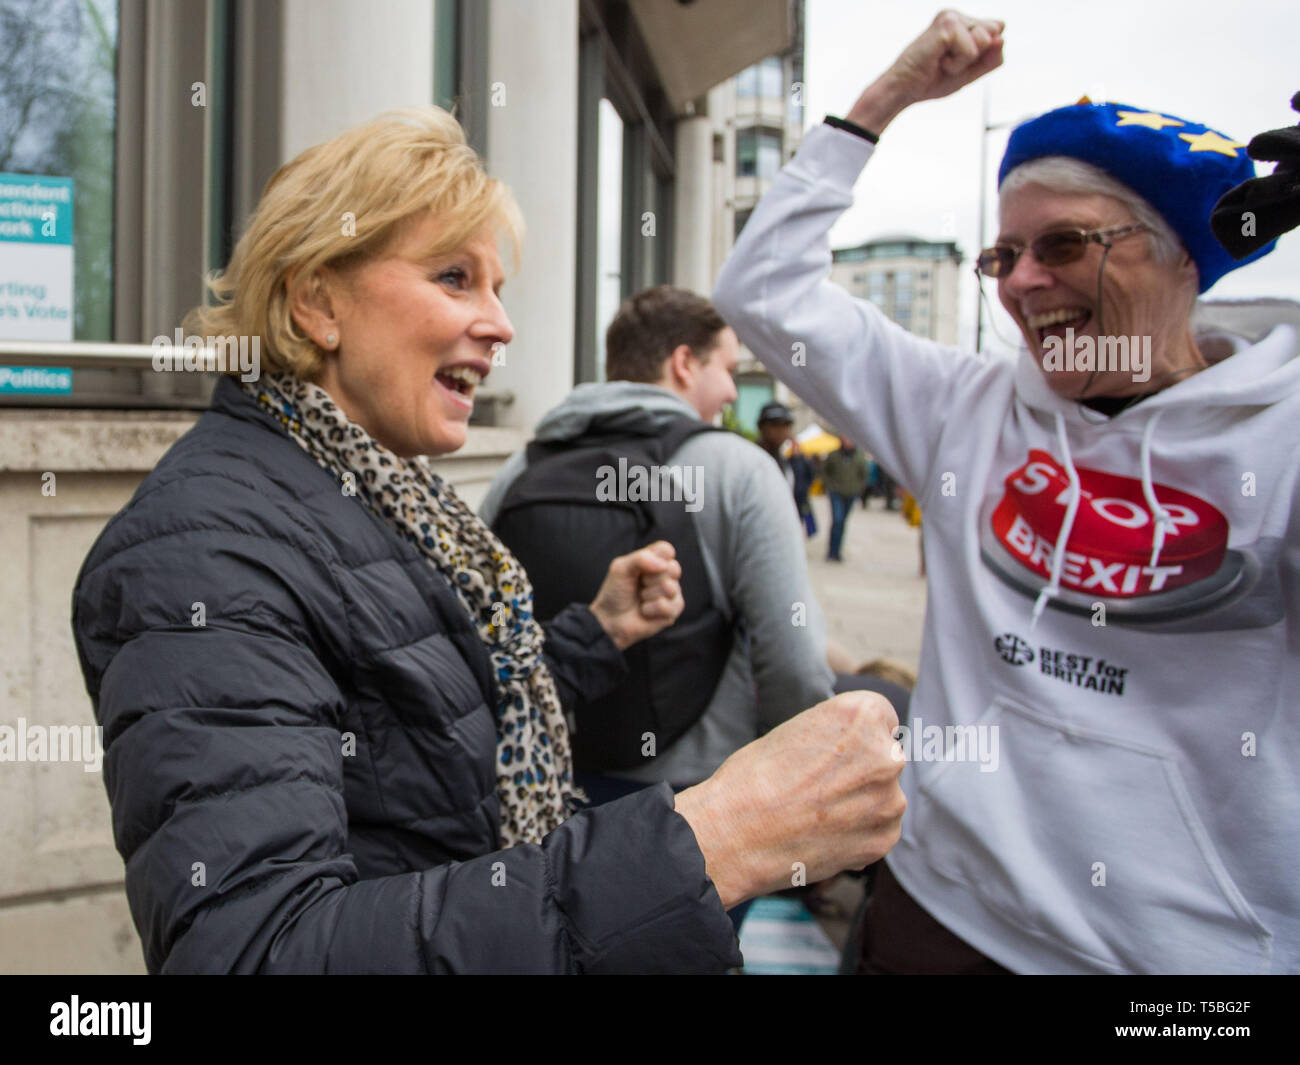 Put It To The People march sees hundreds of thousands of people march through London demanding a final say on Brexit  Featuring: Anna Soubry Where: London, United Kingdom When: 23 Mar 2019 Credit: Wheatley/WENN Stock Photo